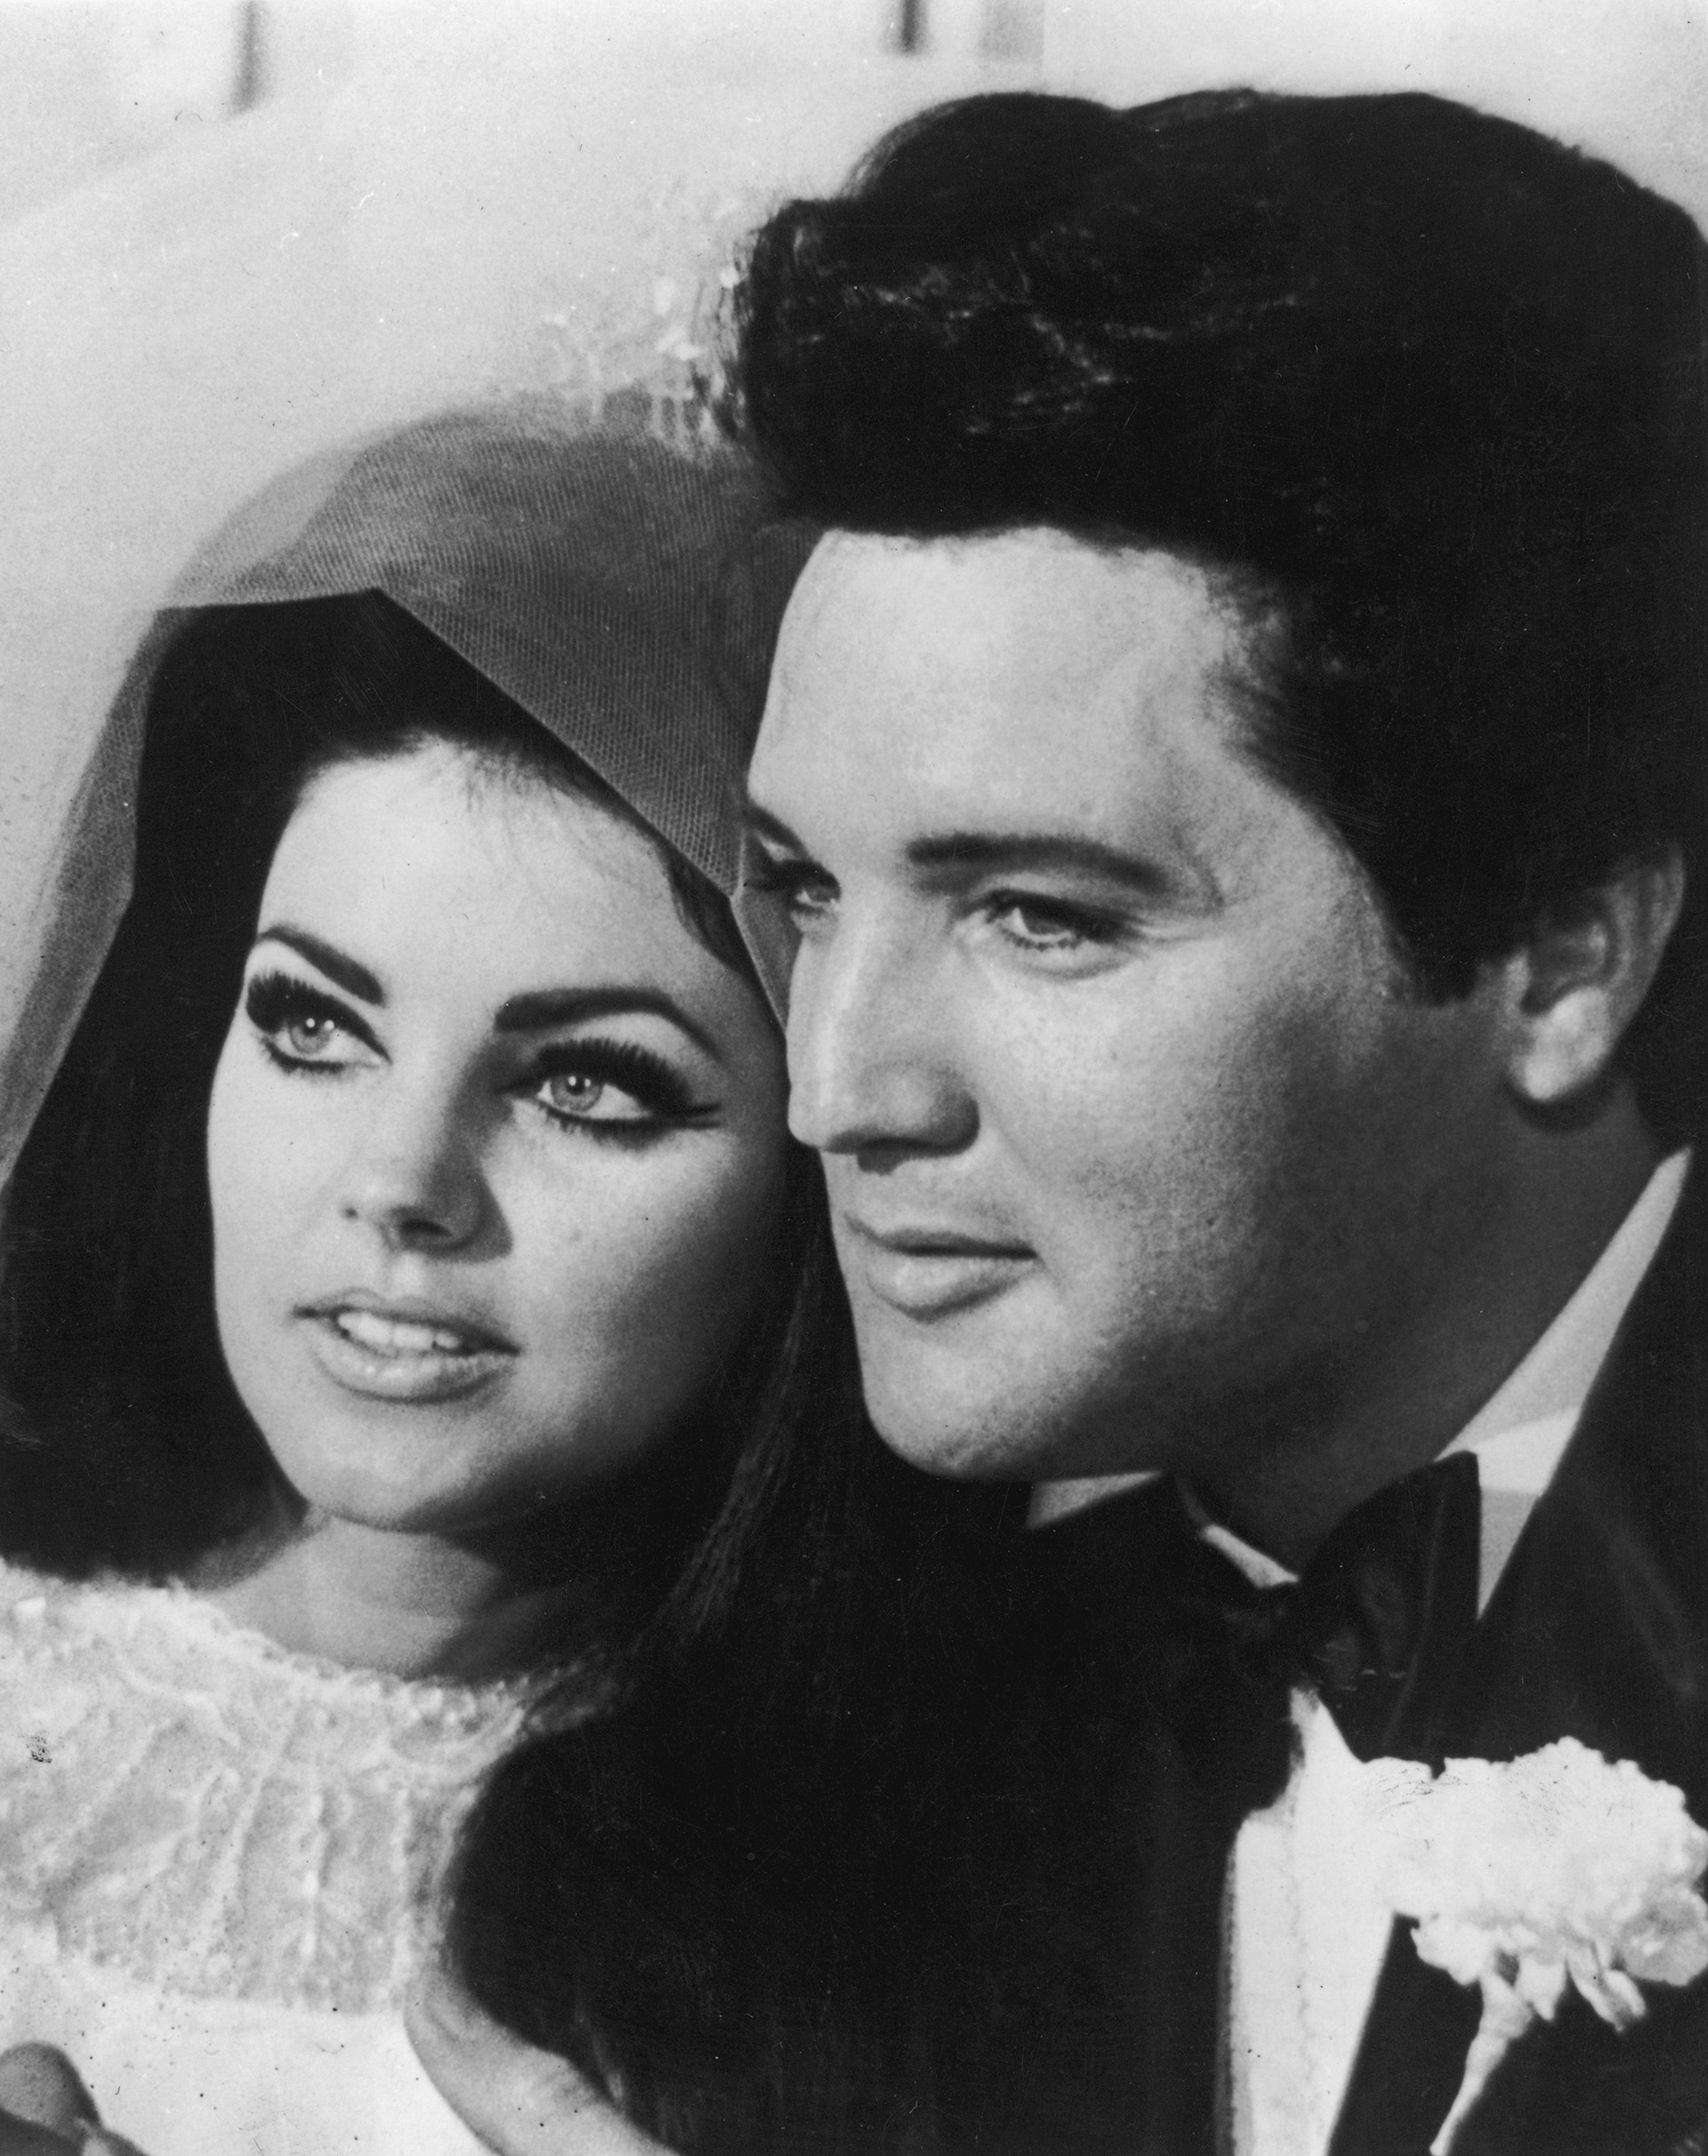 Another image of the King's wedding with Priscilla Beaulieu in Las Vegas; They say that when he met her she felt like a clumsy boy again (Photo by Keystone / Getty Images)